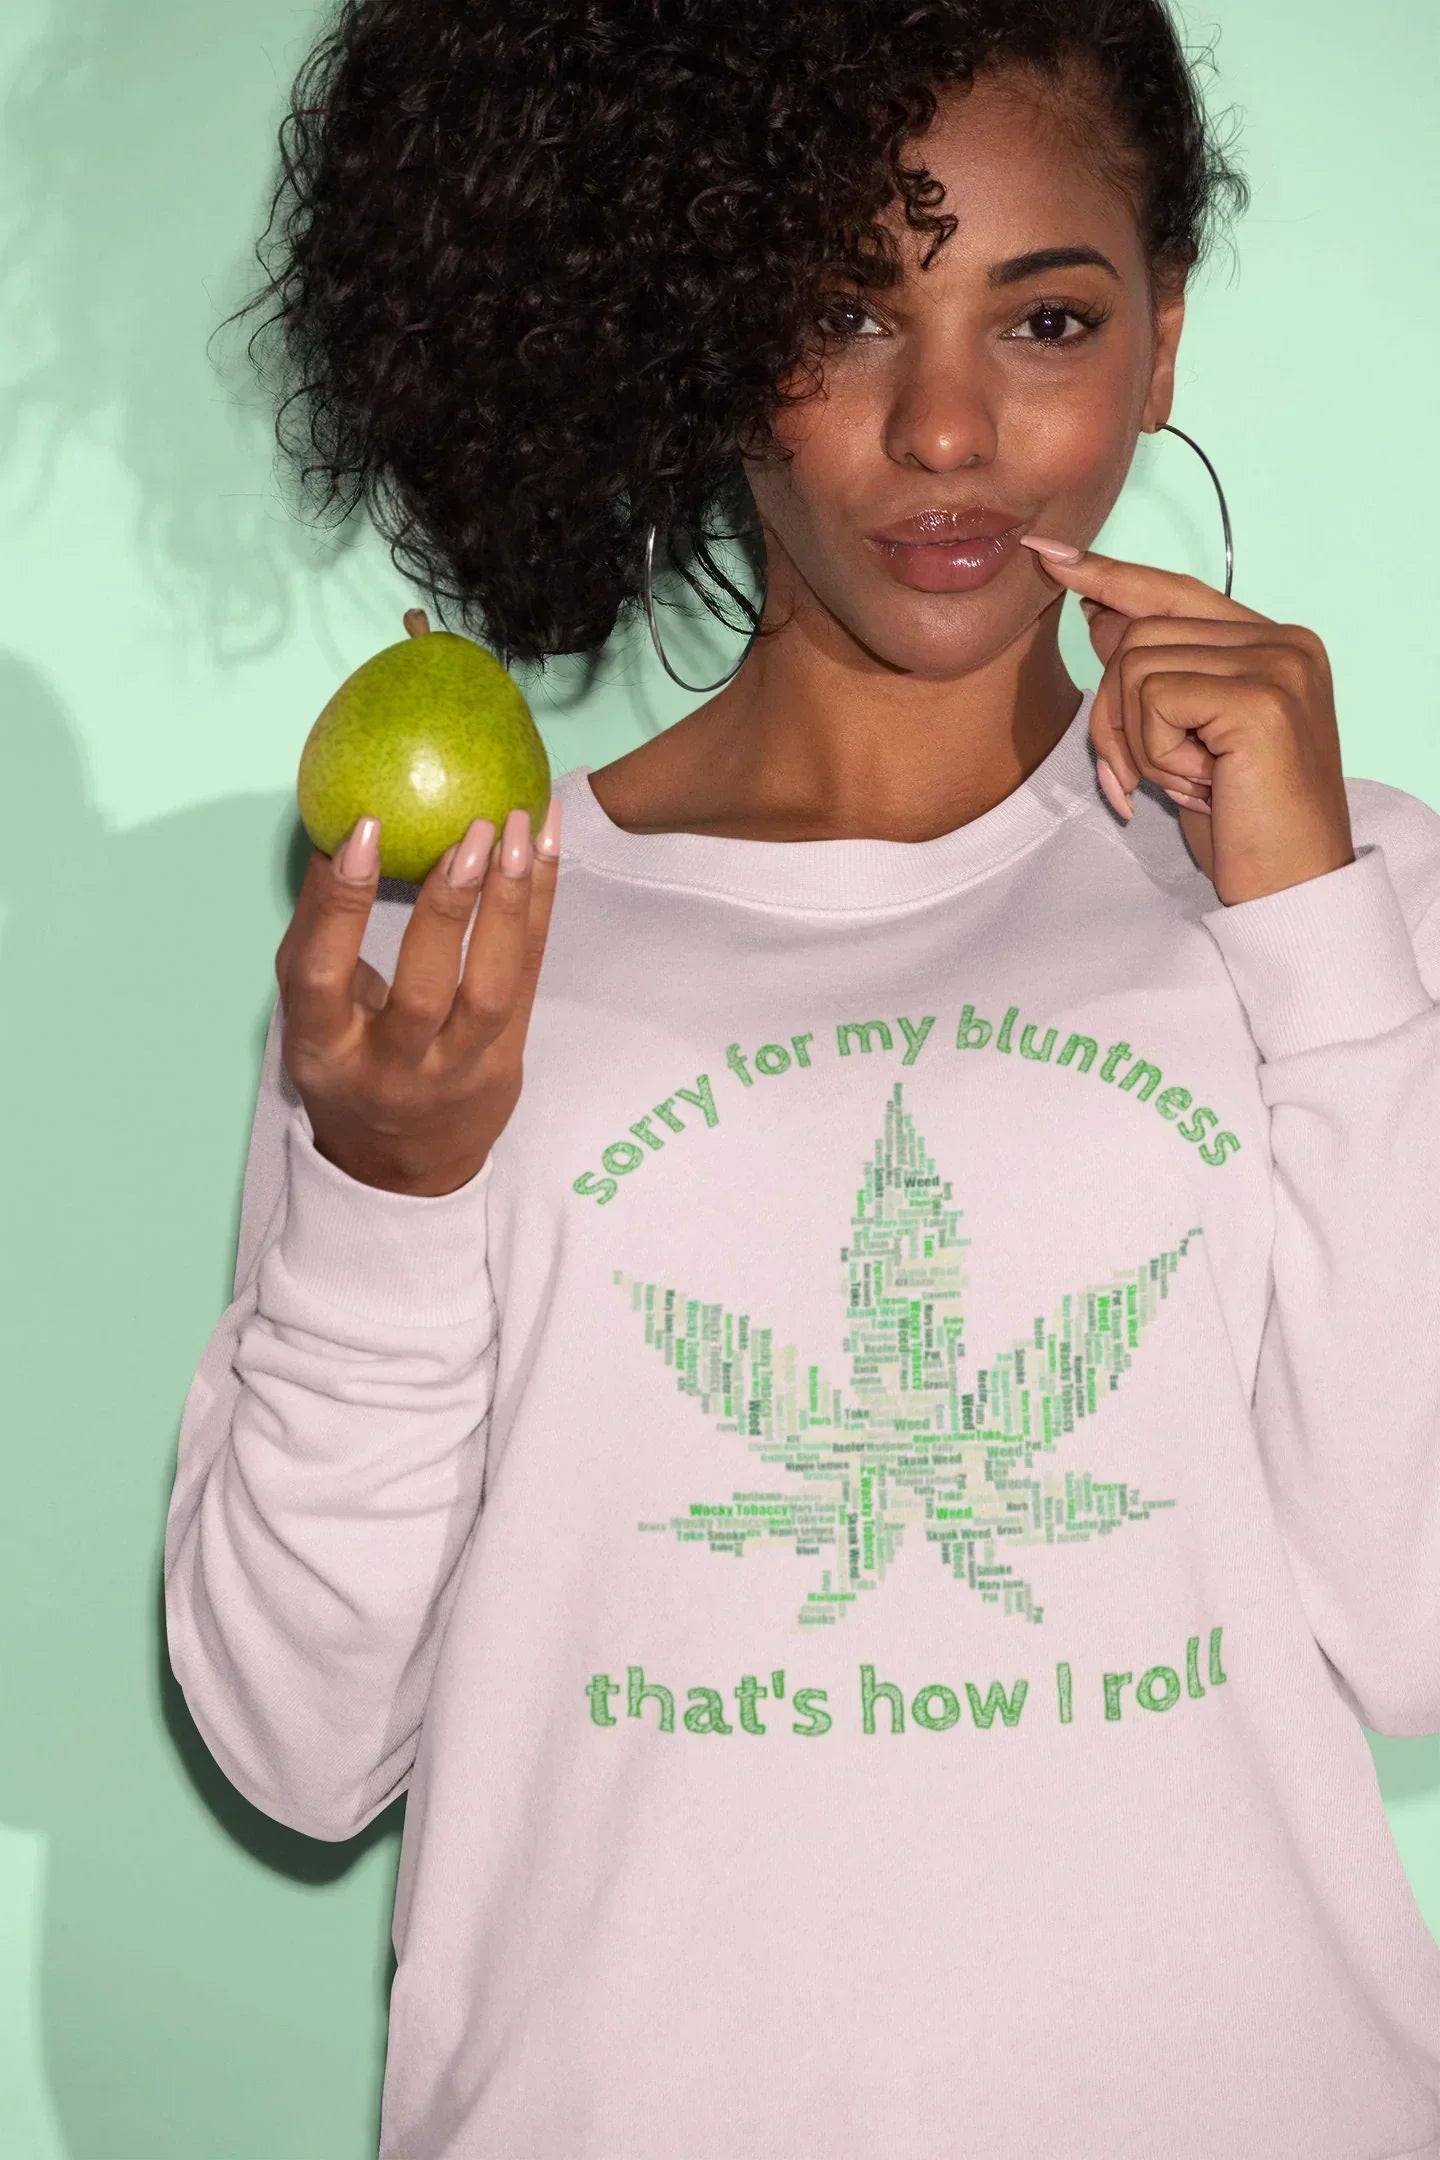 Sorry for My Bluntness, That's How I Roll, Funny Stoner Shirt HMDesignStudioUS